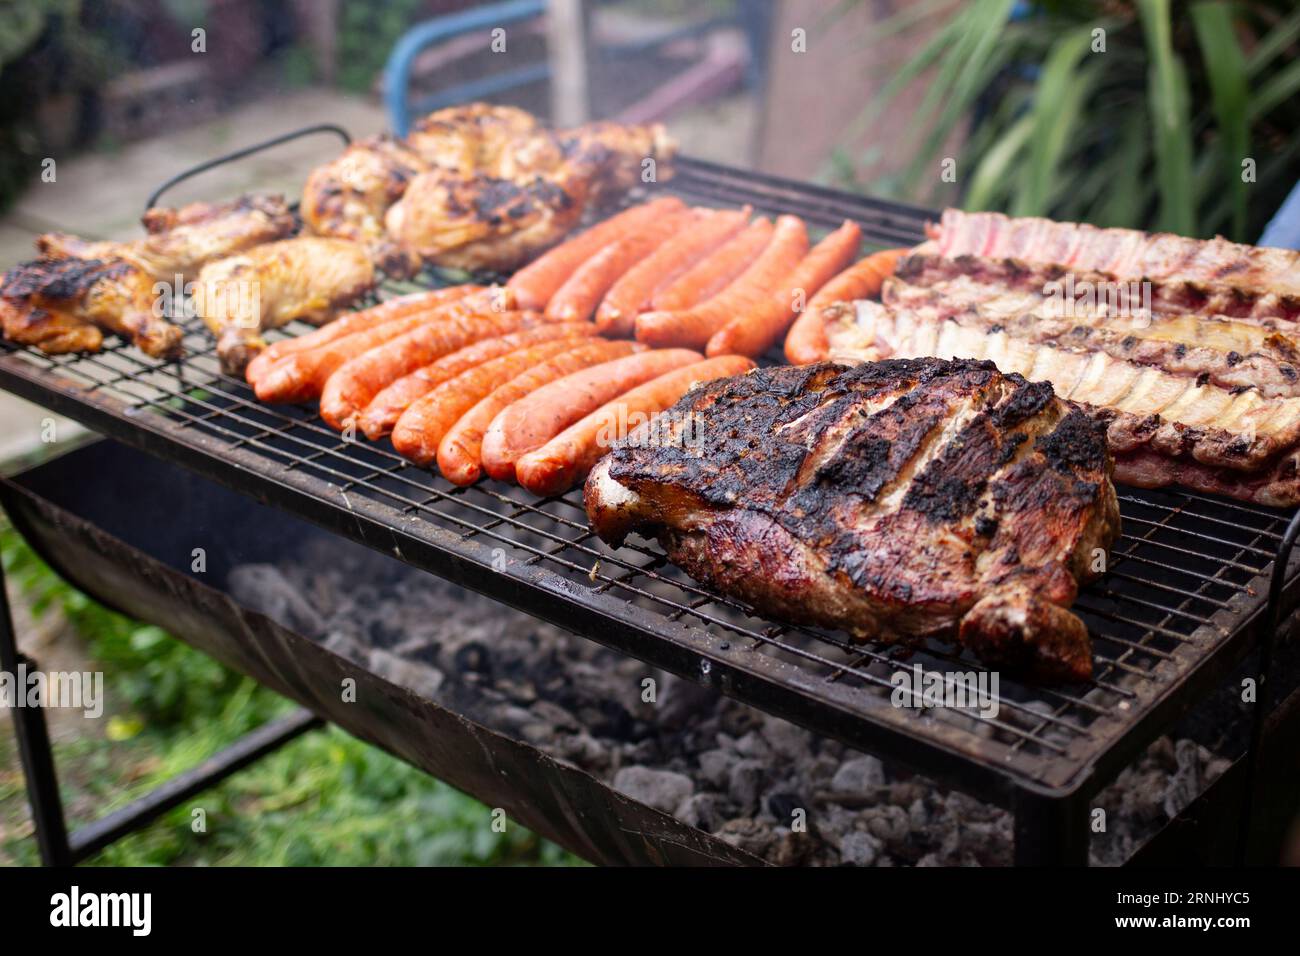 Chilean celebration of the national holidays includes roasts, meats and chickens that are eaten on fire as part of the traditions of Chile Stock Photo